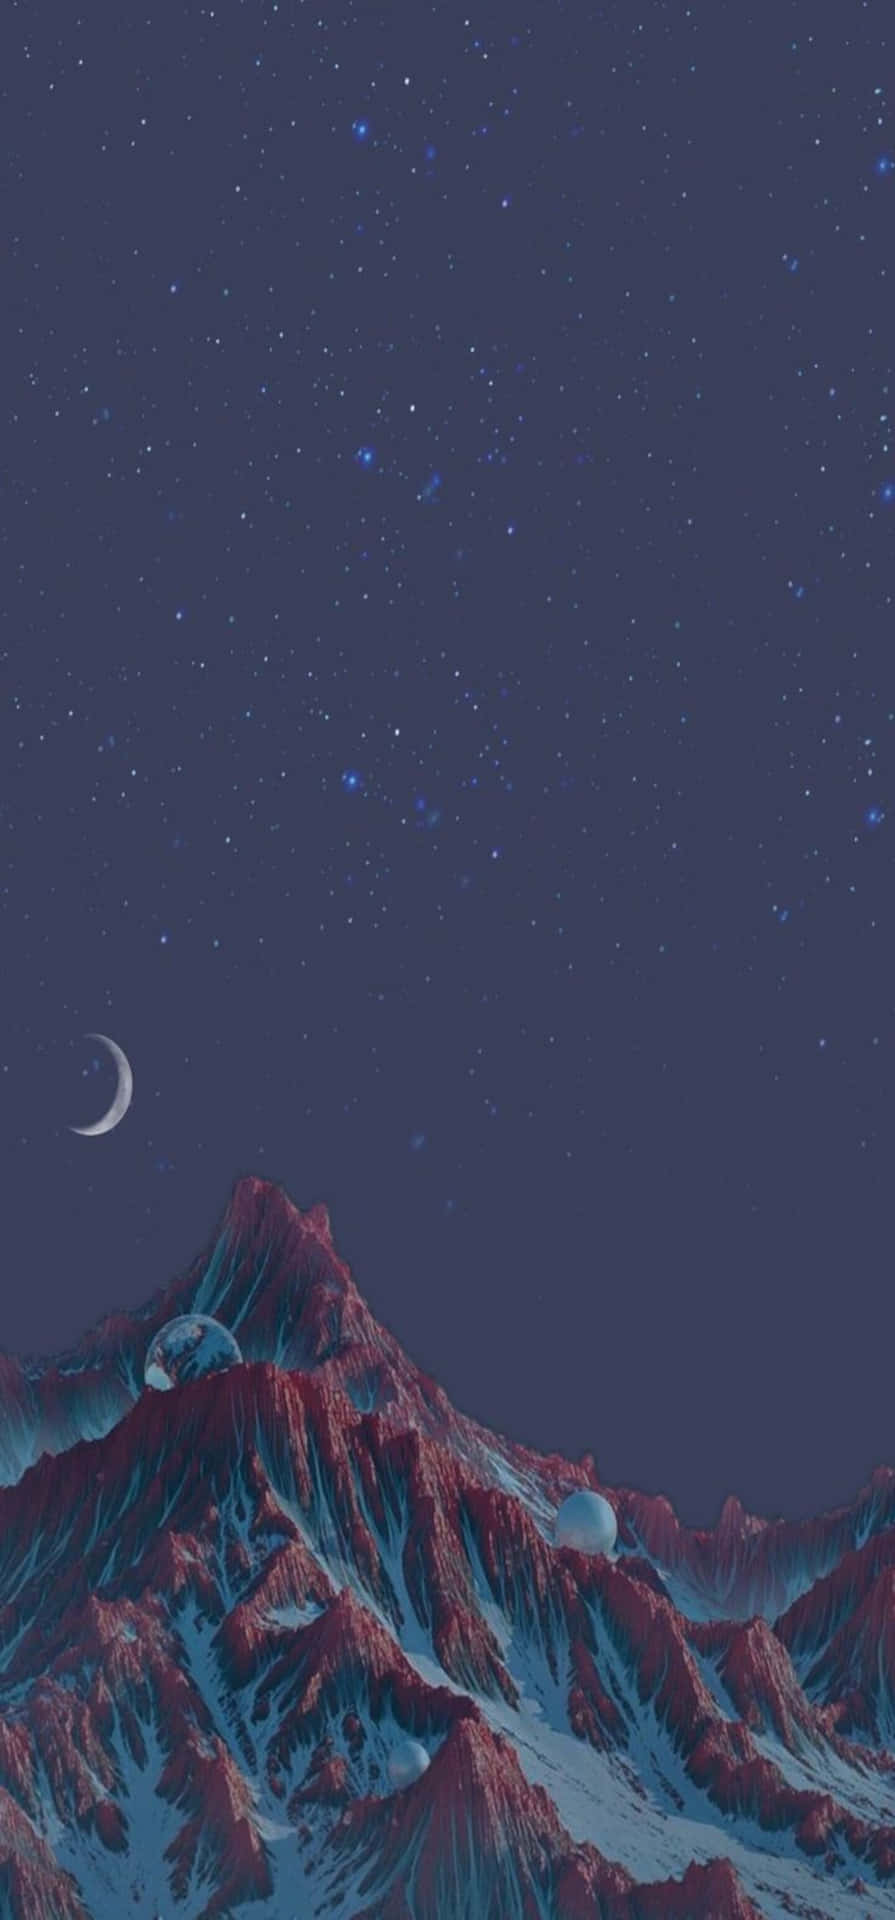 Starry Night Mountain Scape Wallpaper